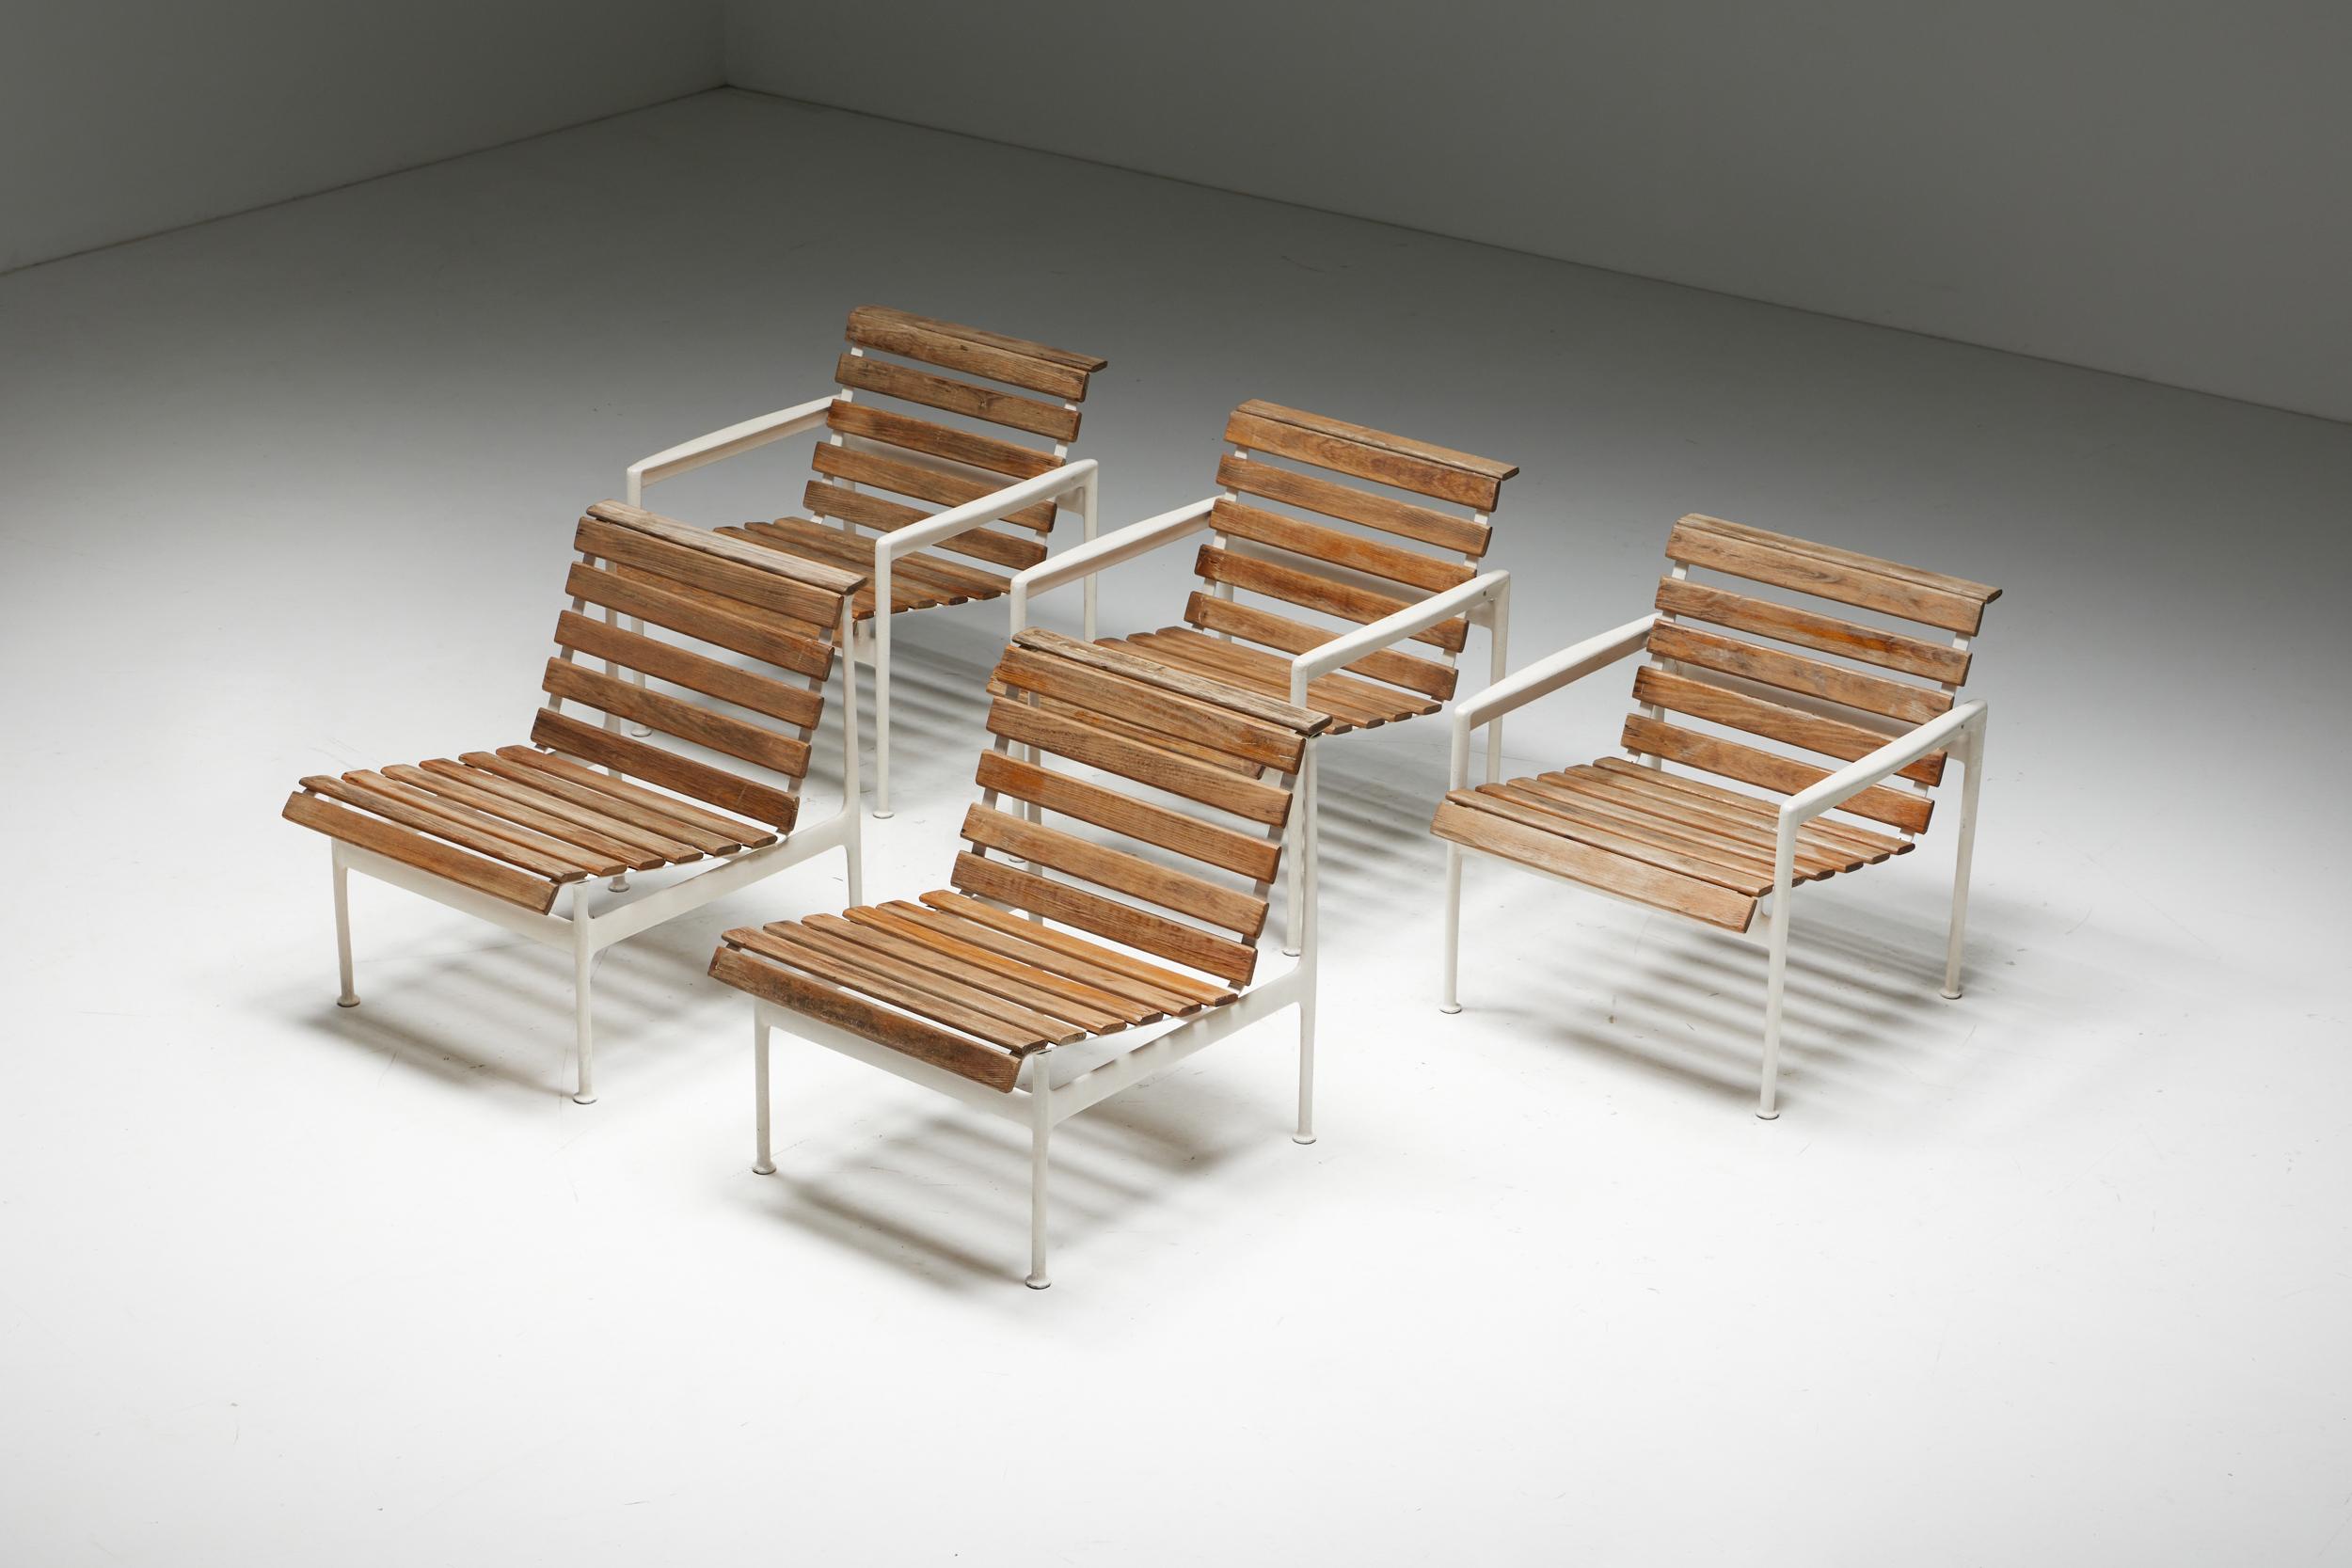 Lounge Chairs by Richard Schultz for Knoll International, United States, 1960s For Sale 2